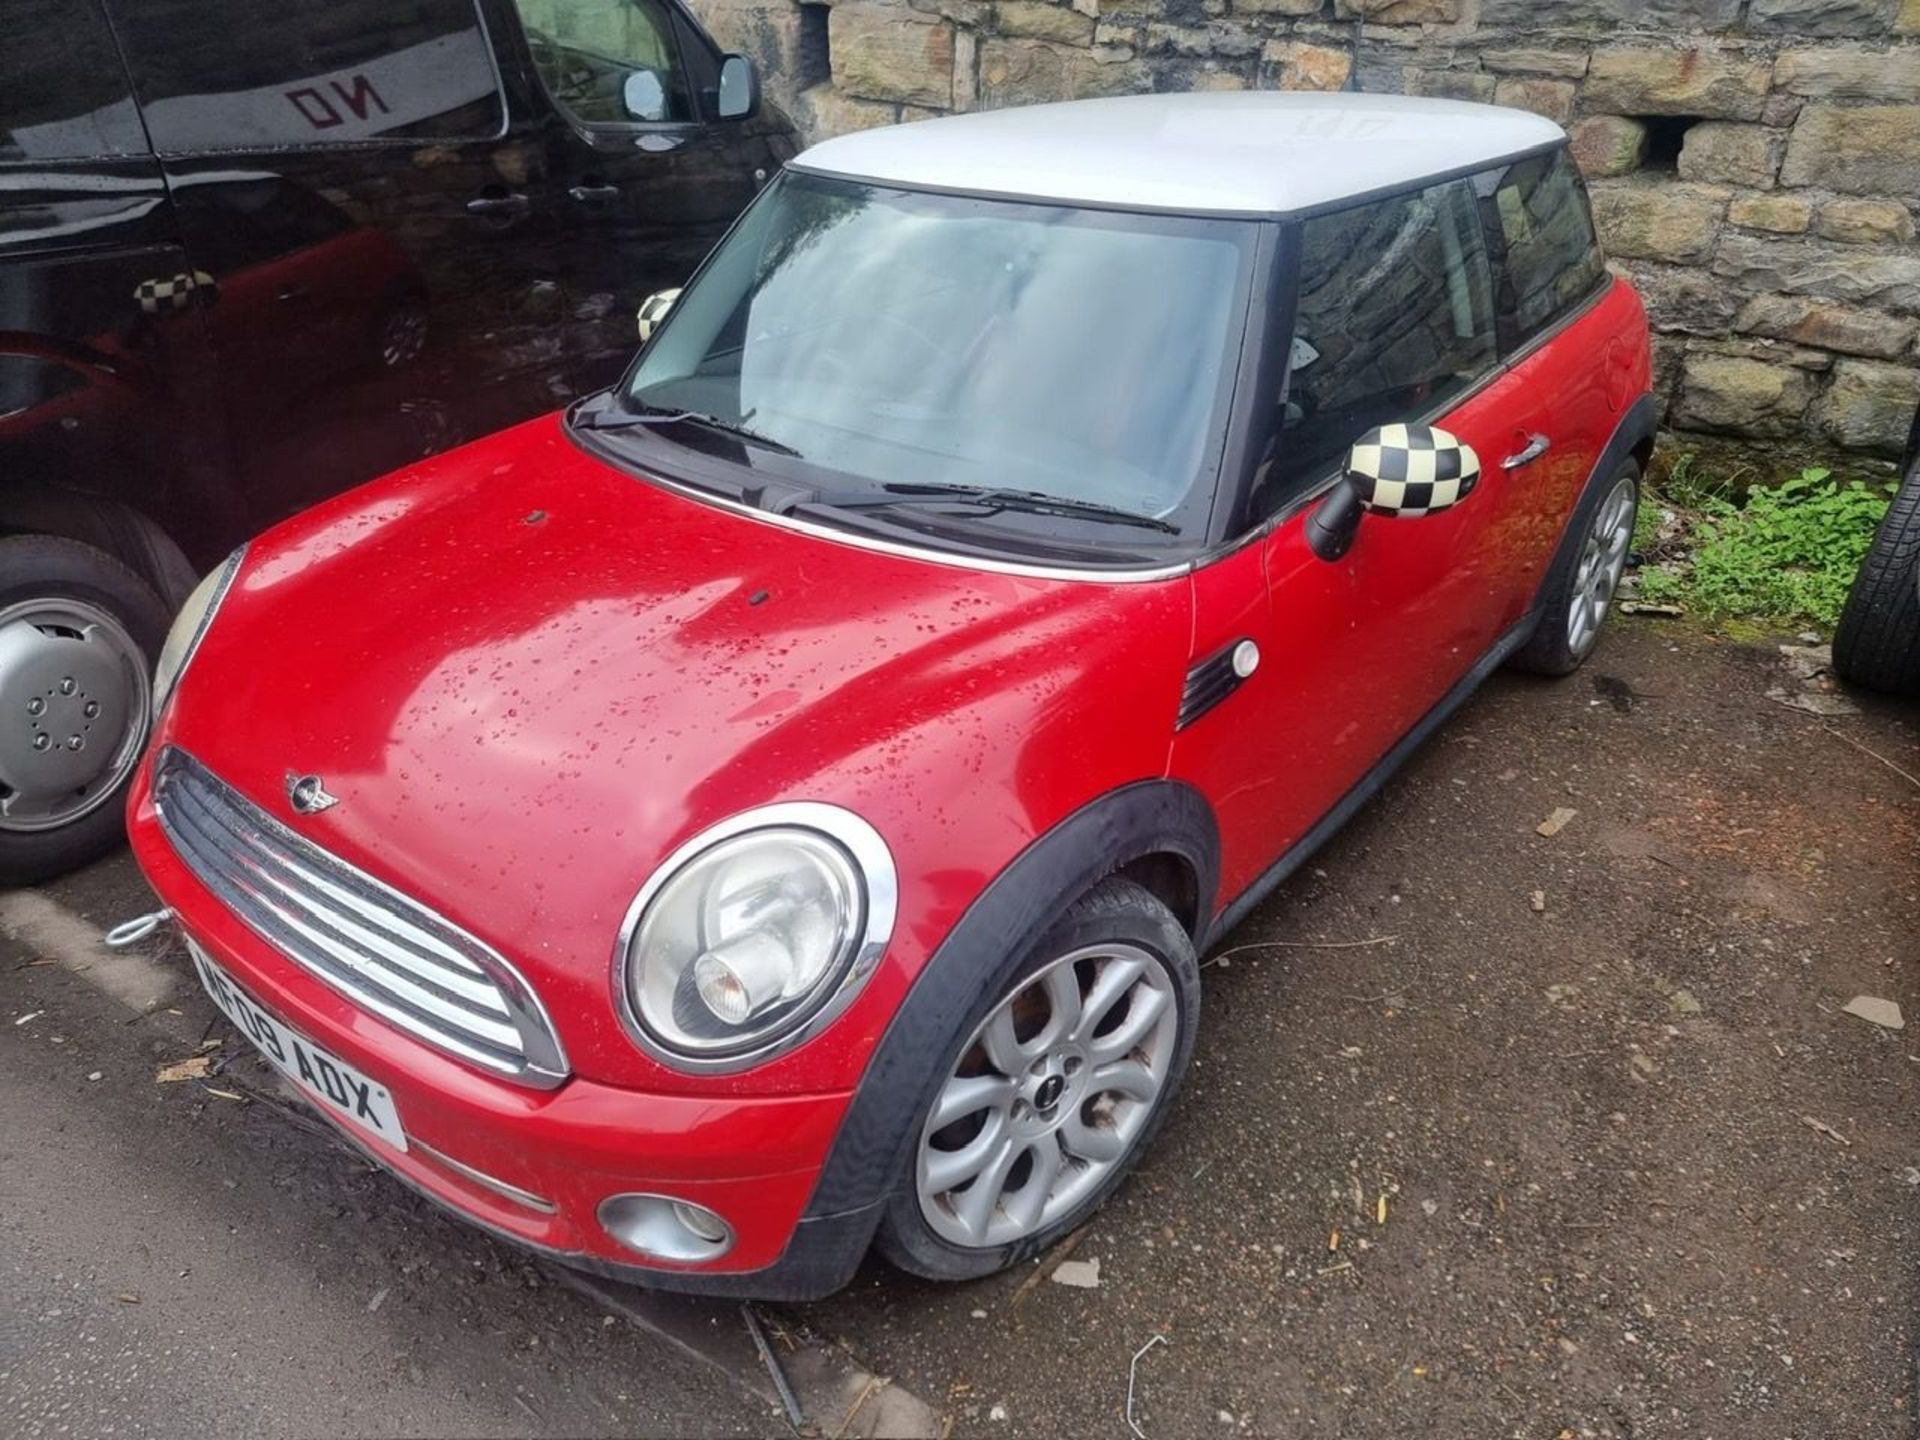 MF09 ADX MINI COOPER 1.6 HATCHBACK 98,263 MILES Date of registration:01/03/2009   Air Conditioning